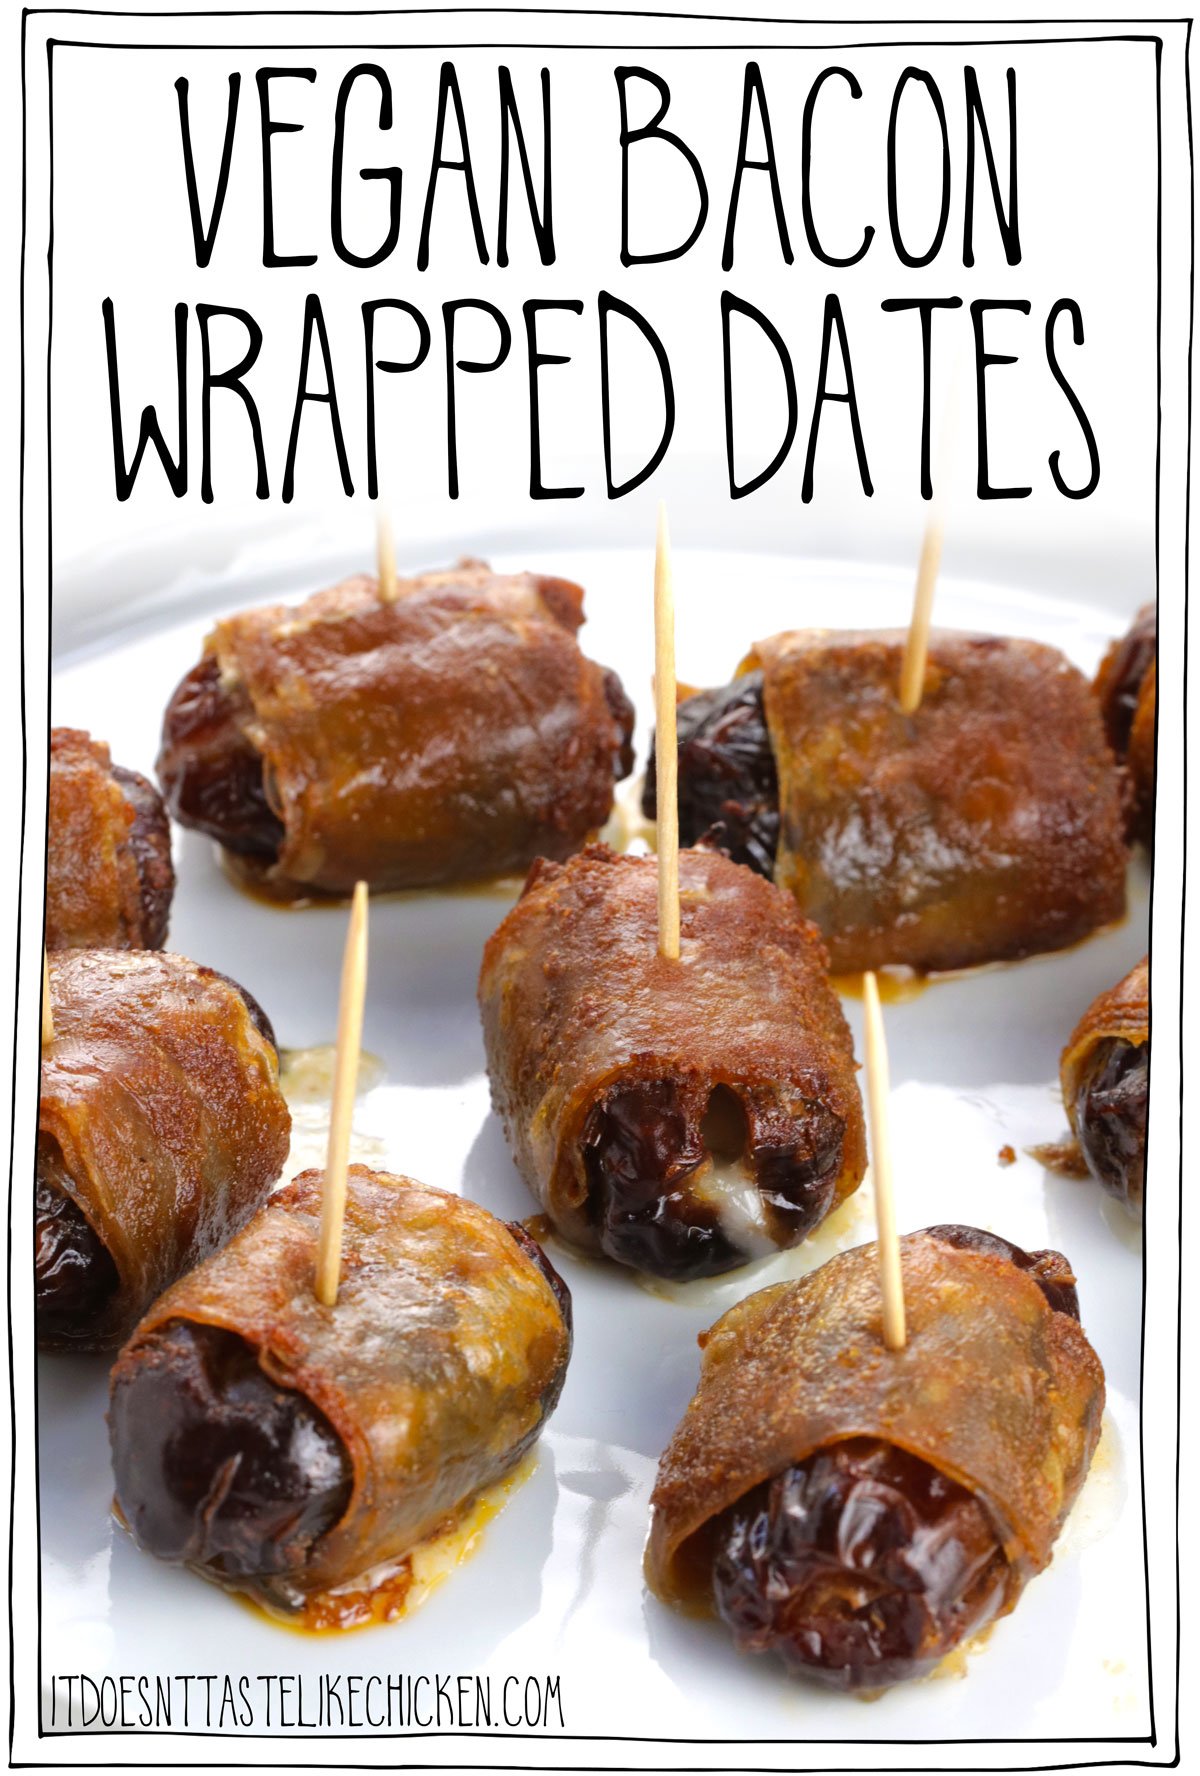 Sweet sticky dates are stuffed with creamy vegan cheese and wrapped in homemade smoky vegan rice paper bacon! Um, yes, please. Vegan Bacon Wrapped Dates are the perfect sweet and salty appetizer that looks and tastes super impressive but it's actually pretty easy to make with just 9 ingredients! The perfect vegan appetizer for your holiday parties and dinner parties. #itdoesnttastelikechicken #veganappetizer